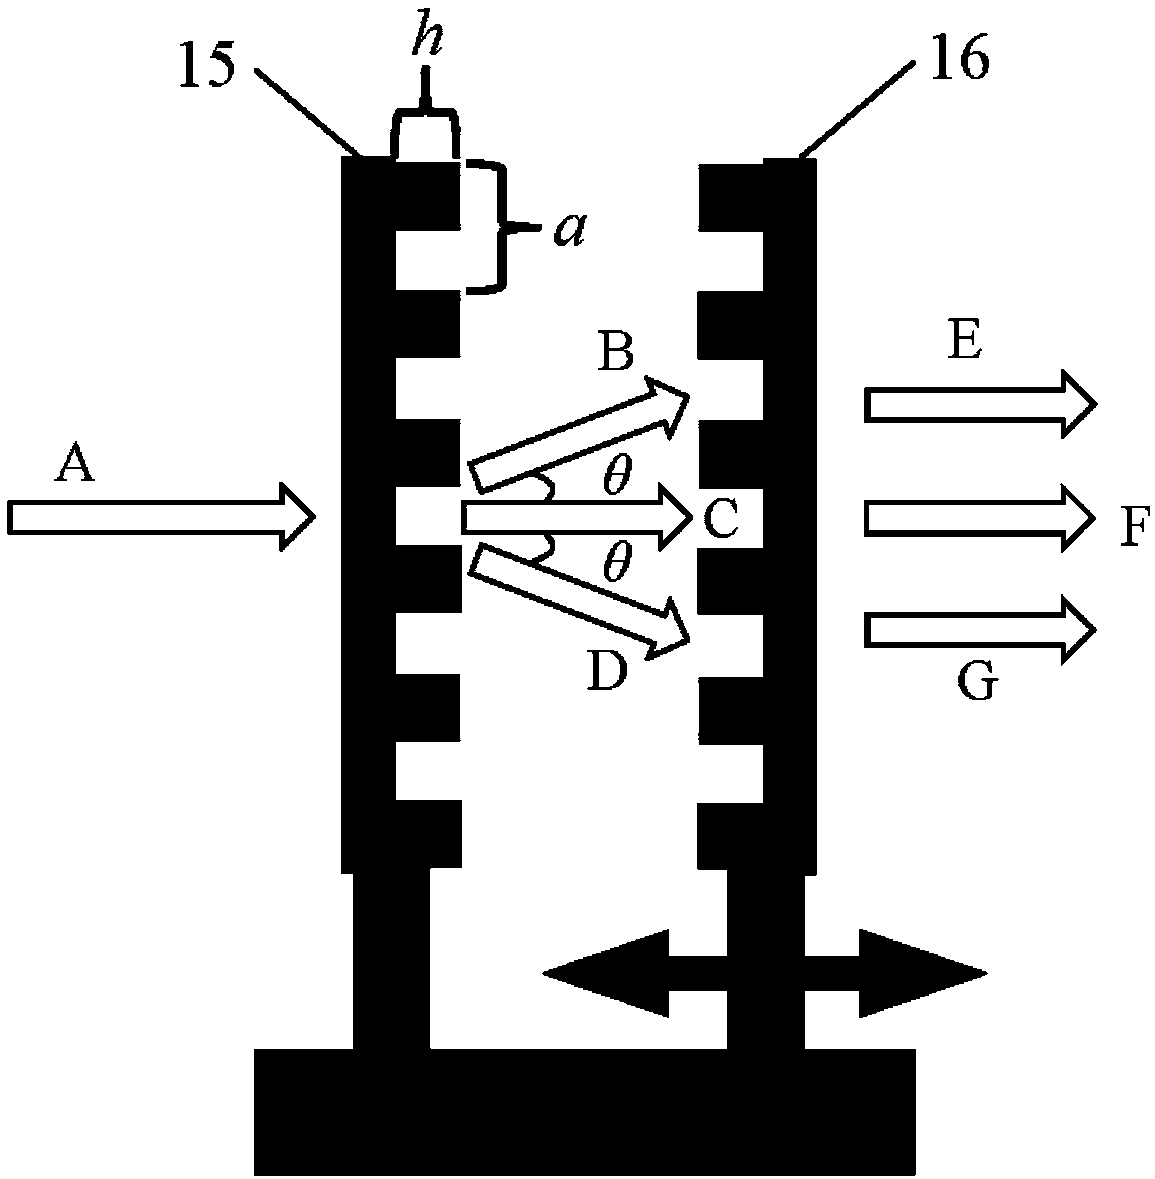 Double-femtosecond optical frequency comb generation device